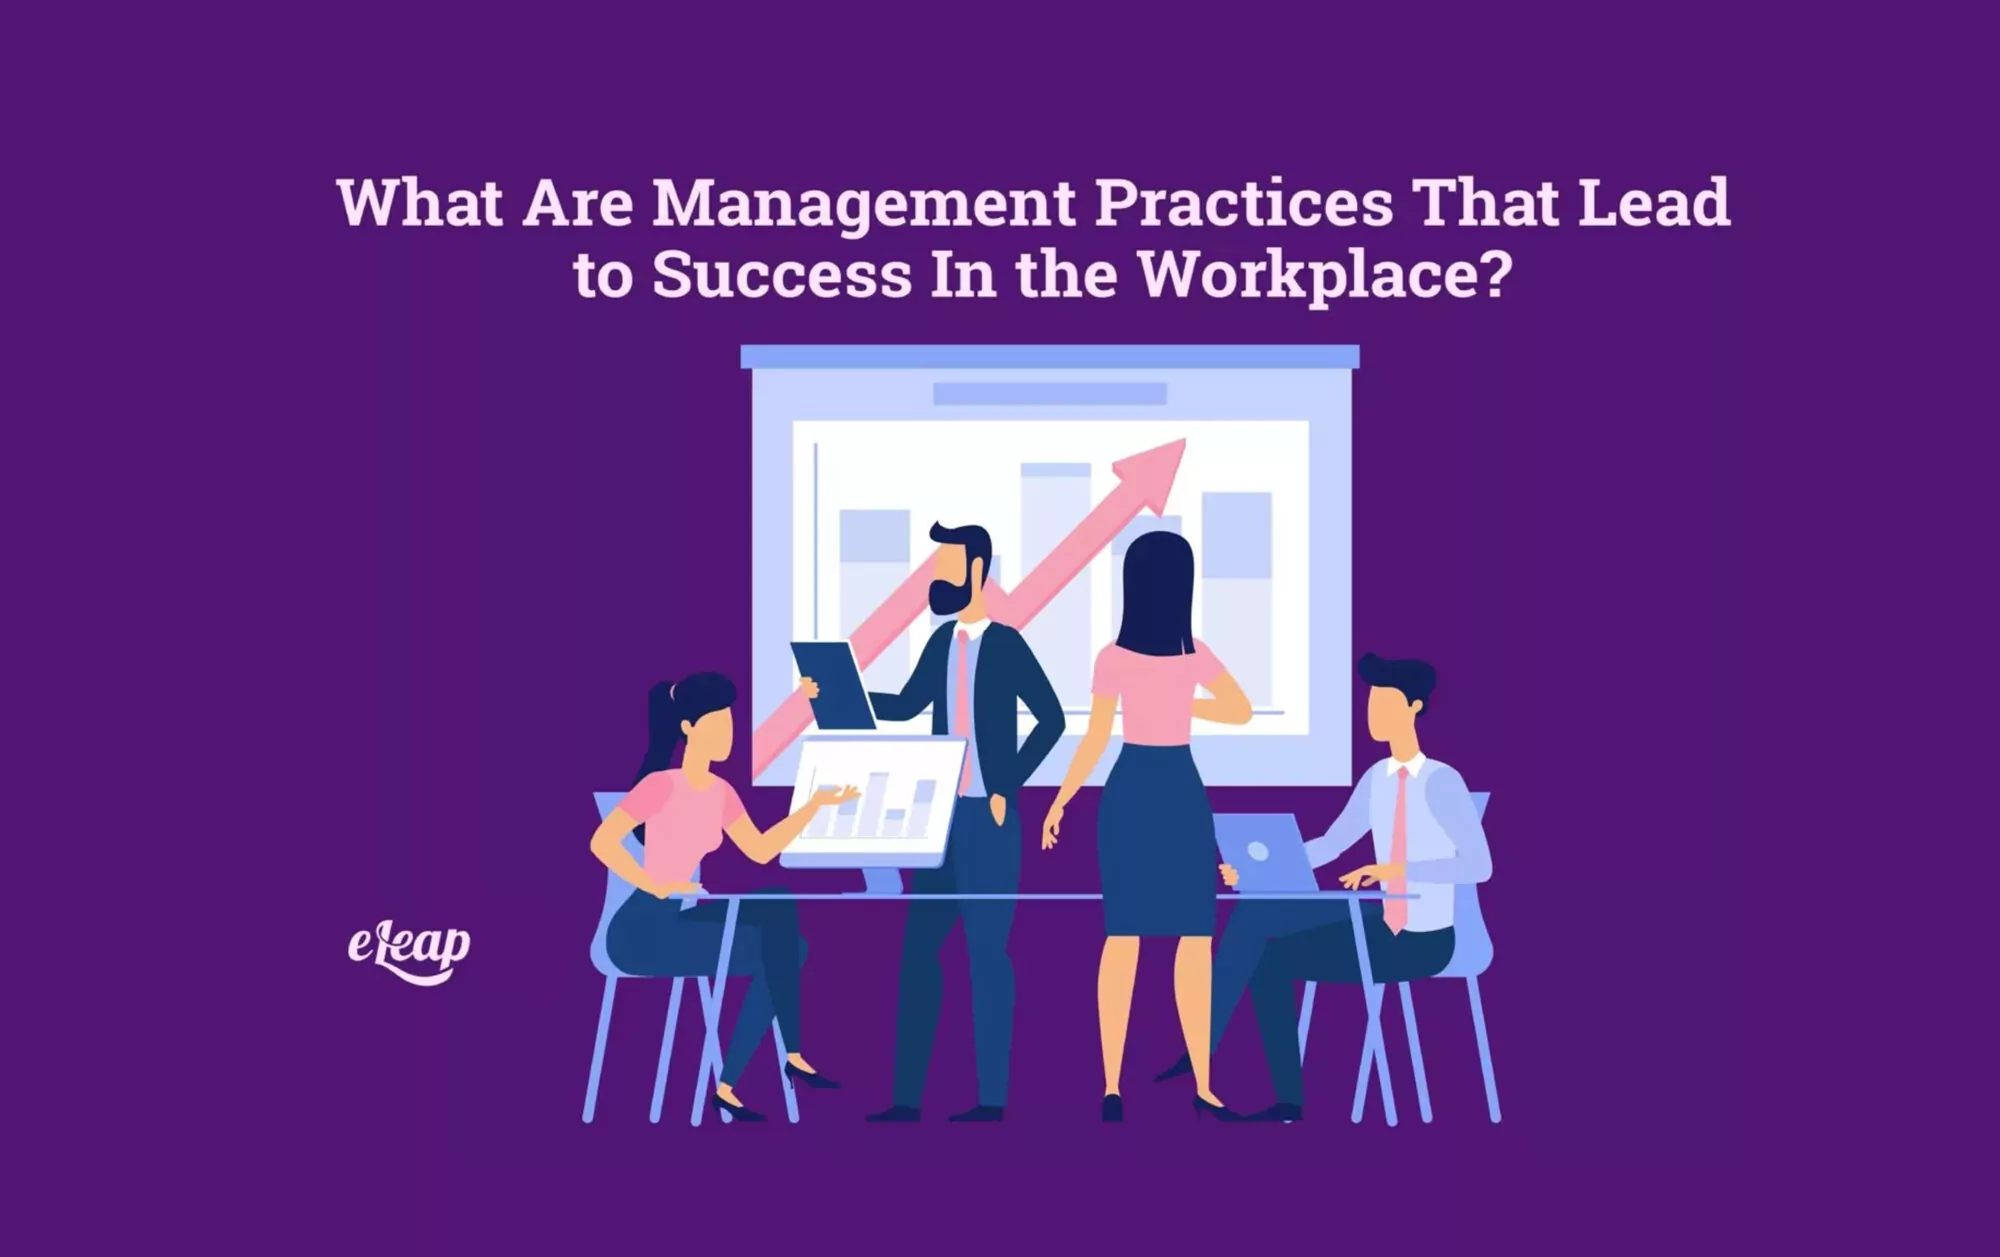 What Are Management Practices